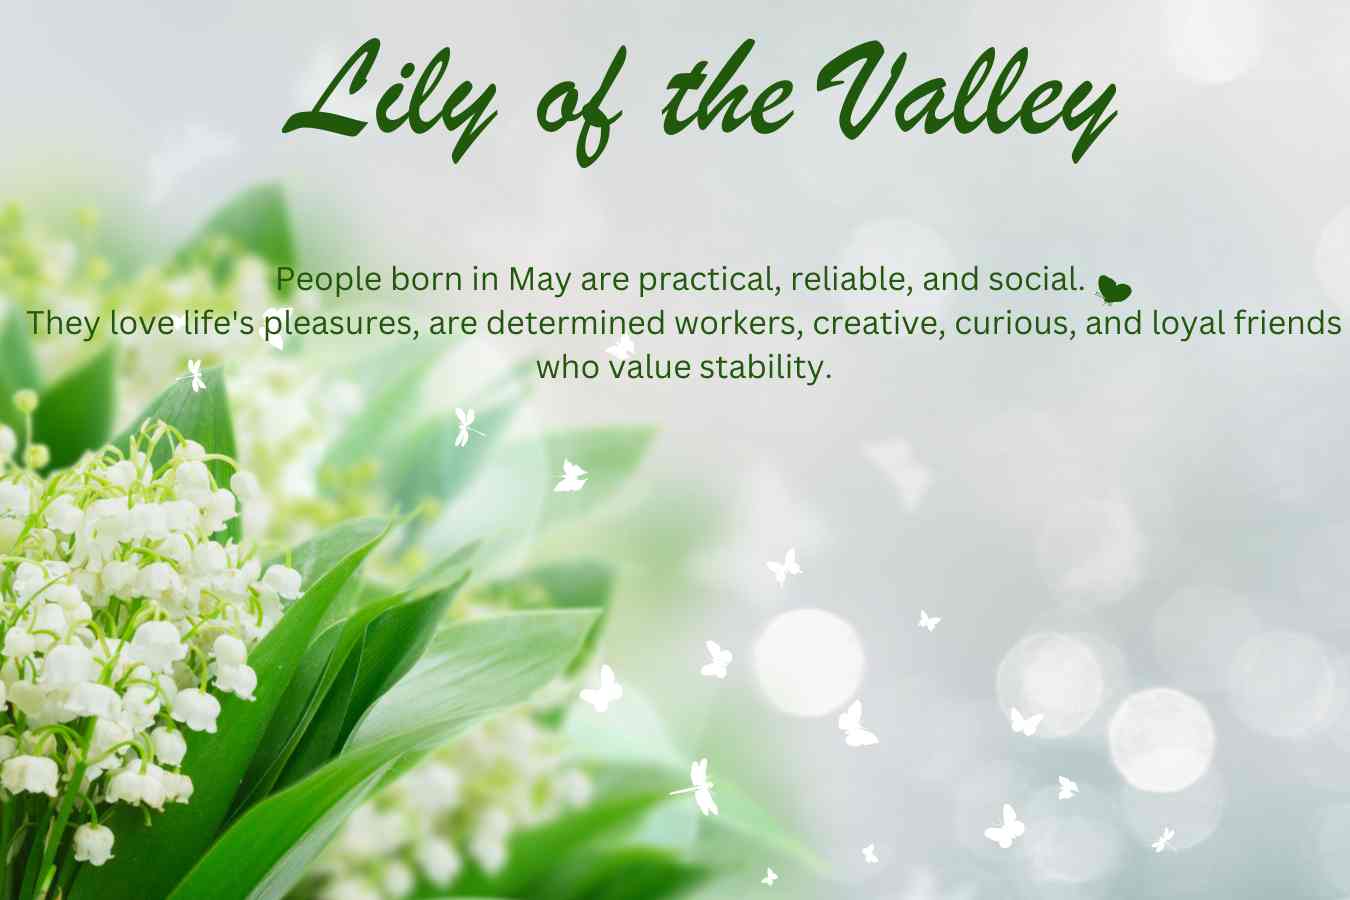 May Birth Flower: Lily of the Valley